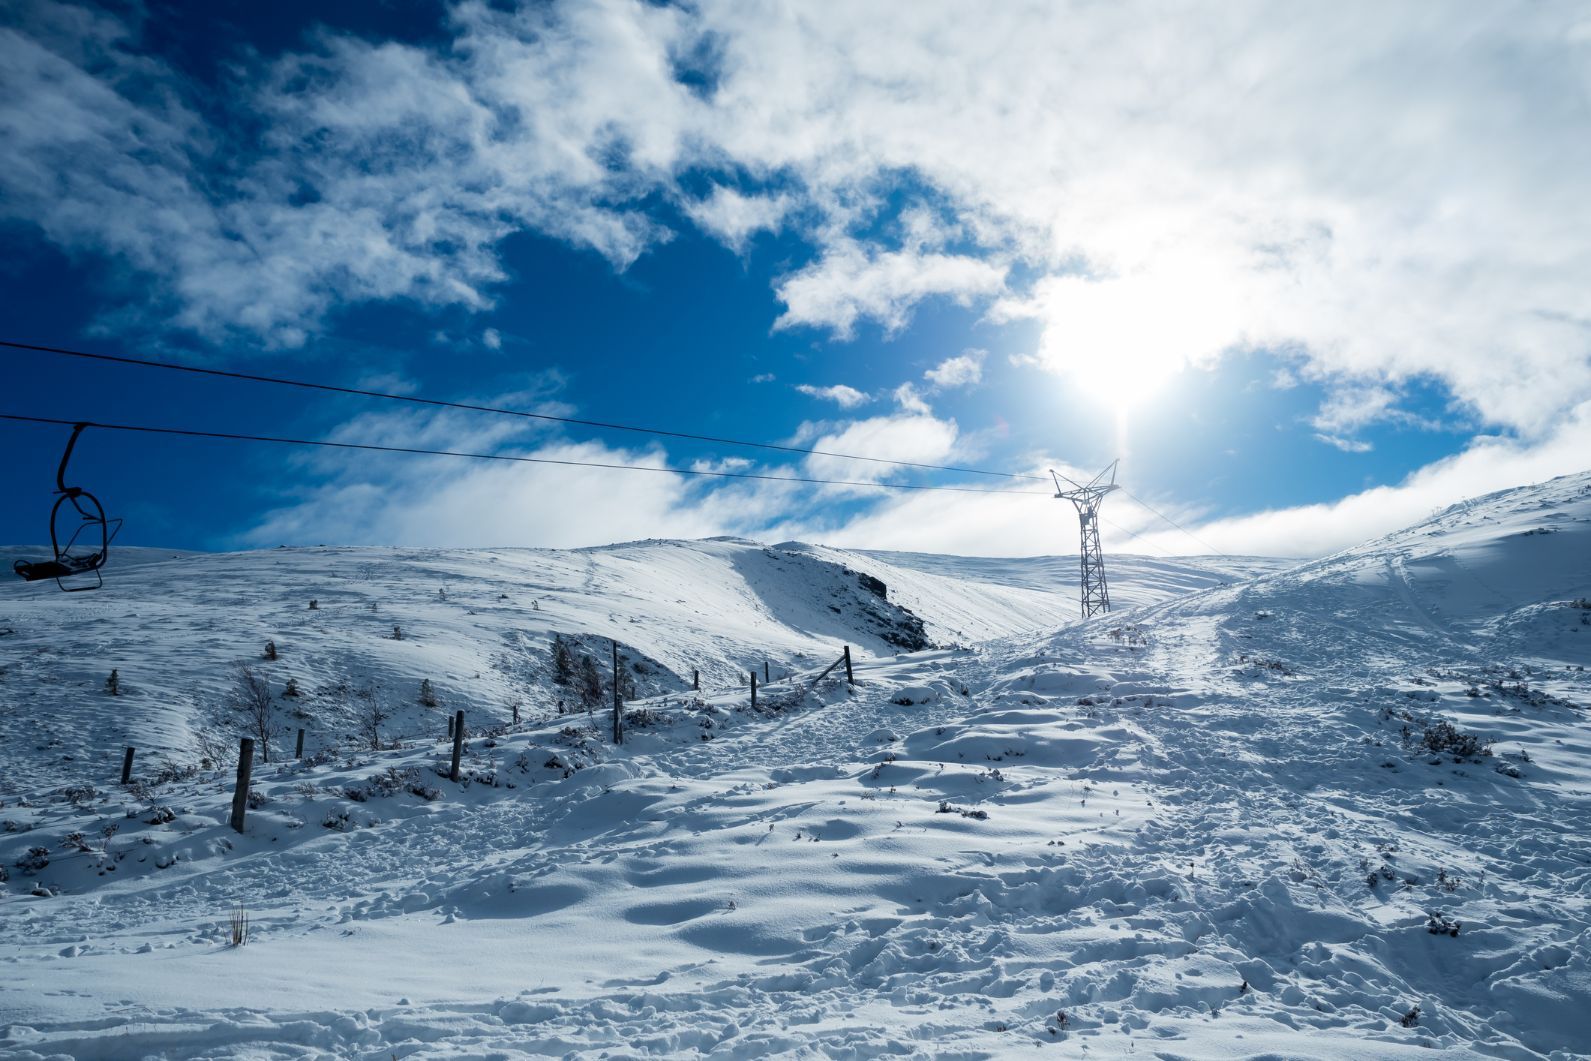 The lifts at Cairngorm Mountain provide excellent backcountry access. Photo: Getty